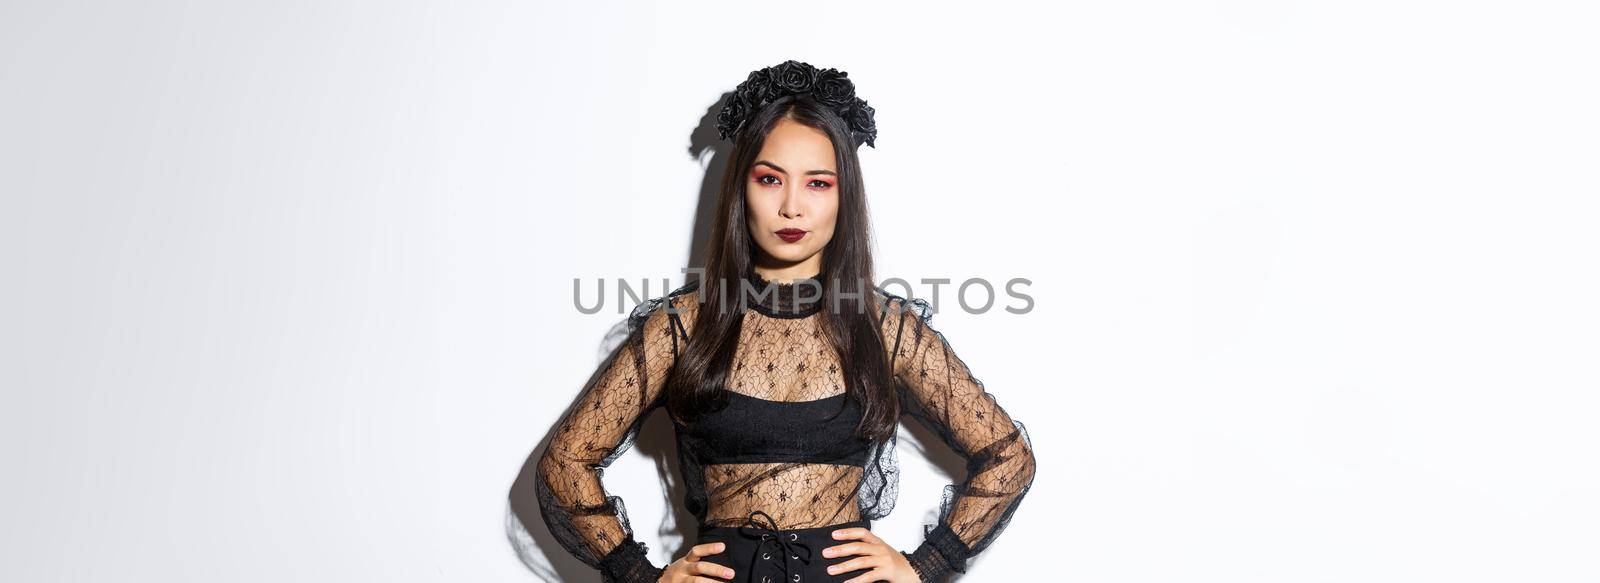 Attractive asian woman in halloween costume looking disappointed and skeptical. Female in black lace dress and wreath looking arrogant, trick or treat in witch outfit, standing white background.